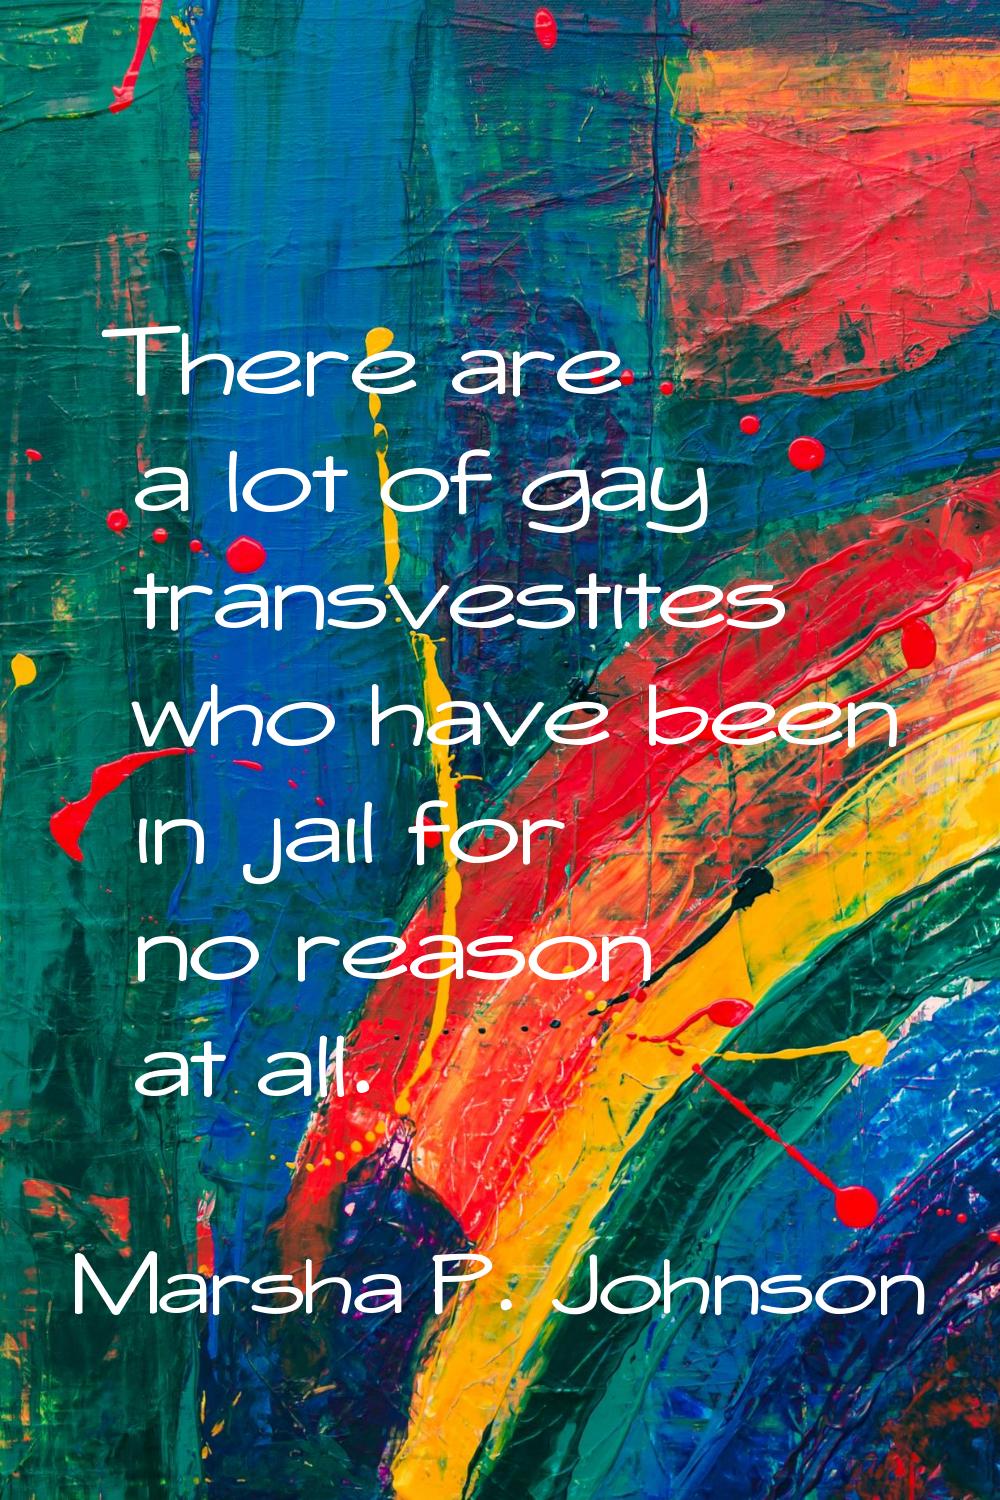 There are a lot of gay transvestites who have been in jail for no reason at all.